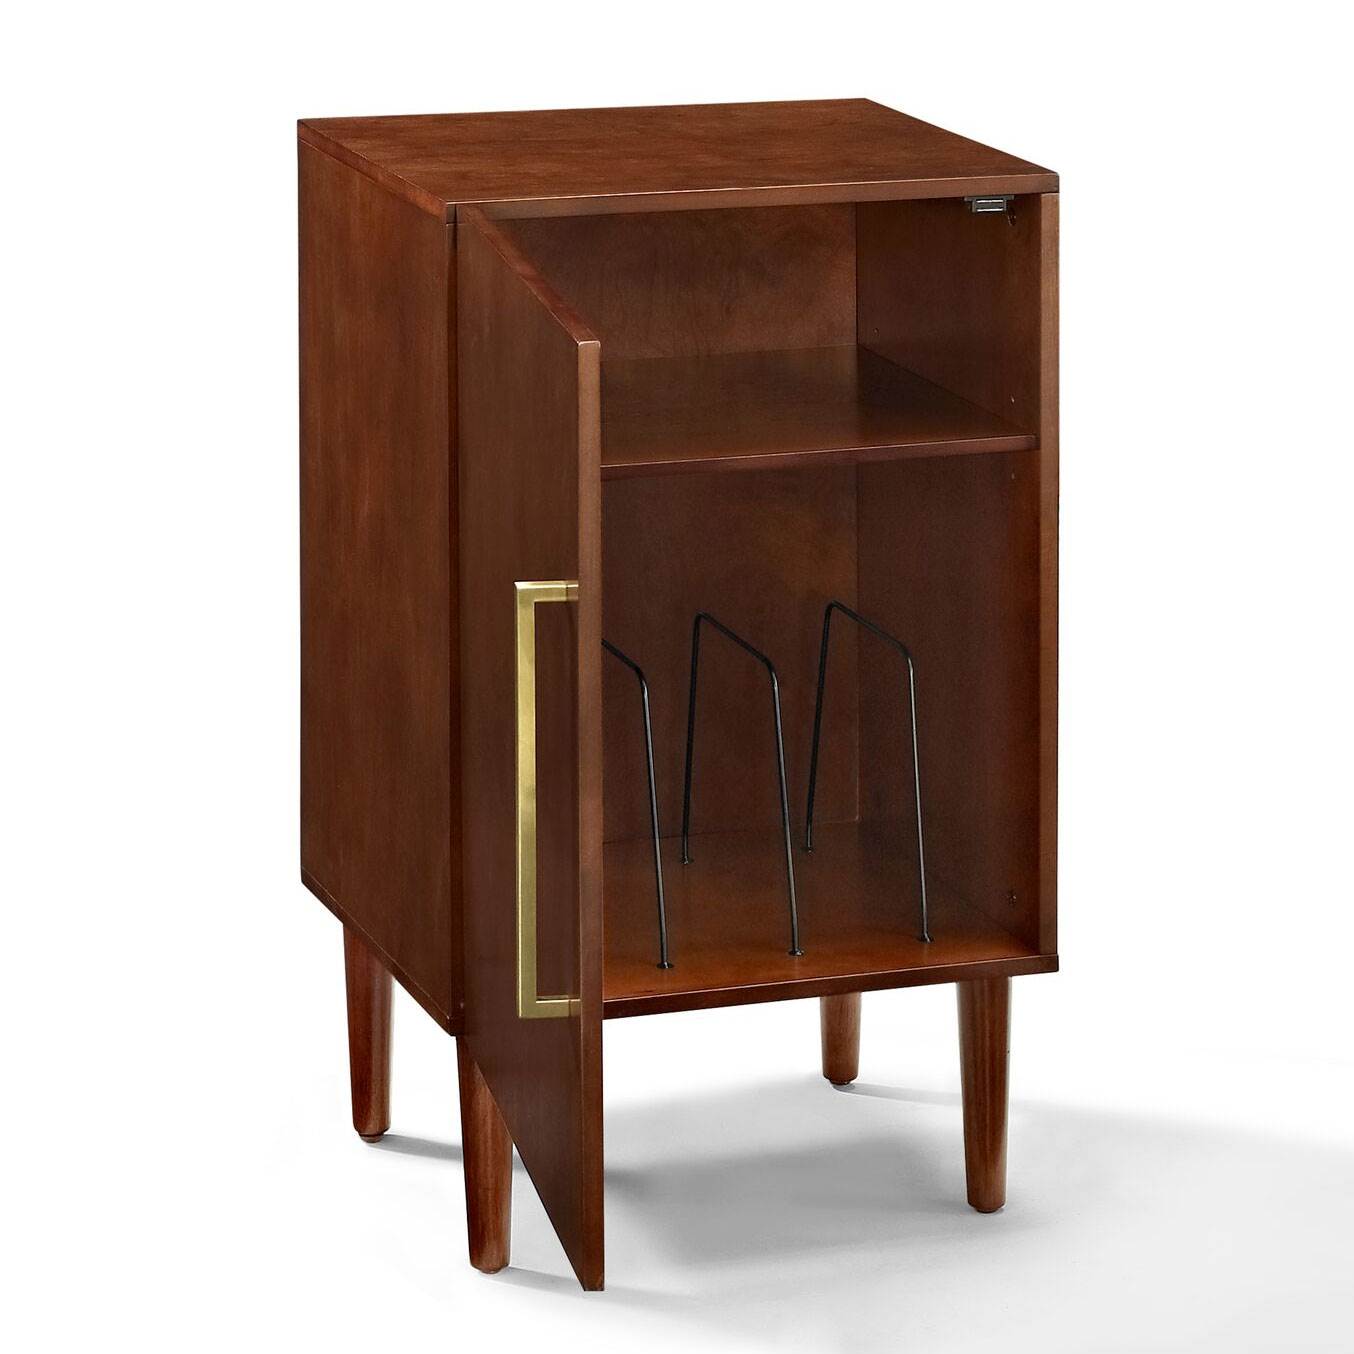 Crosley Mid Century Modern Everett Record Player Turntable Stand Storage Cabinet - image 4 of 11